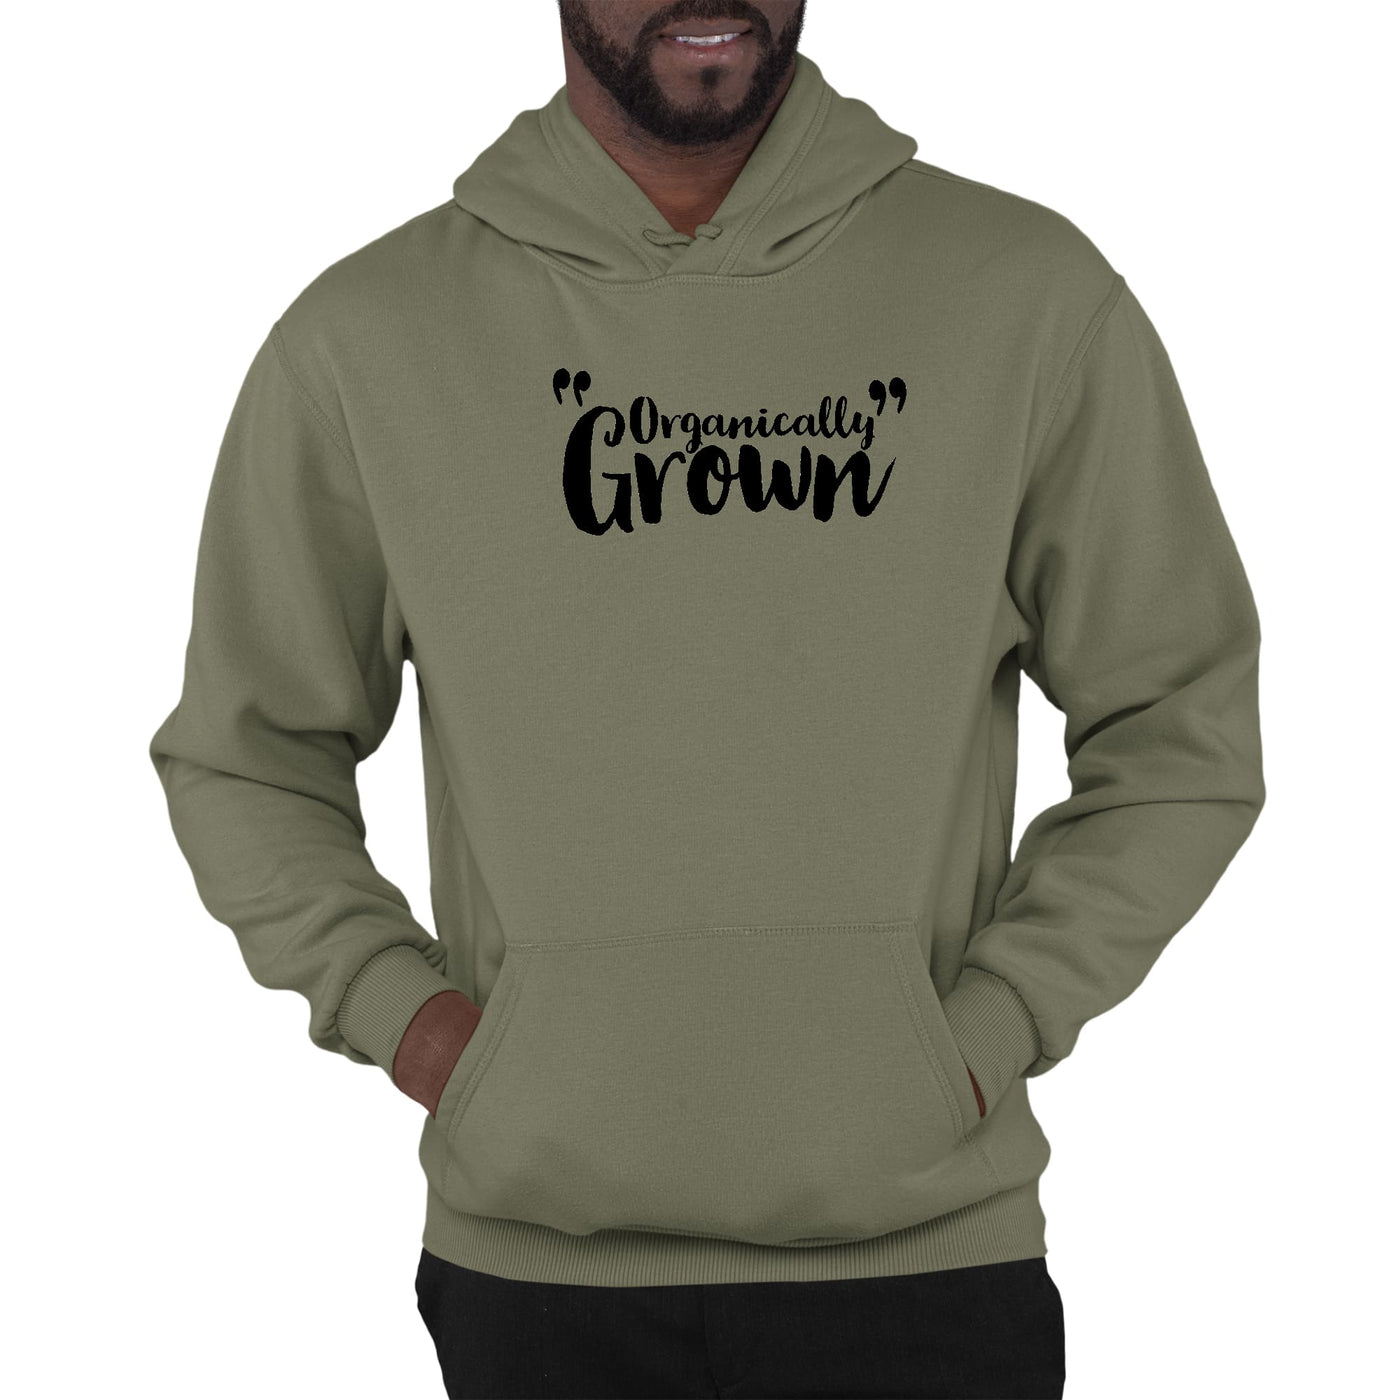 Mens Graphic Hoodie Organically Grown - Affirmation Inspiration - Unisex